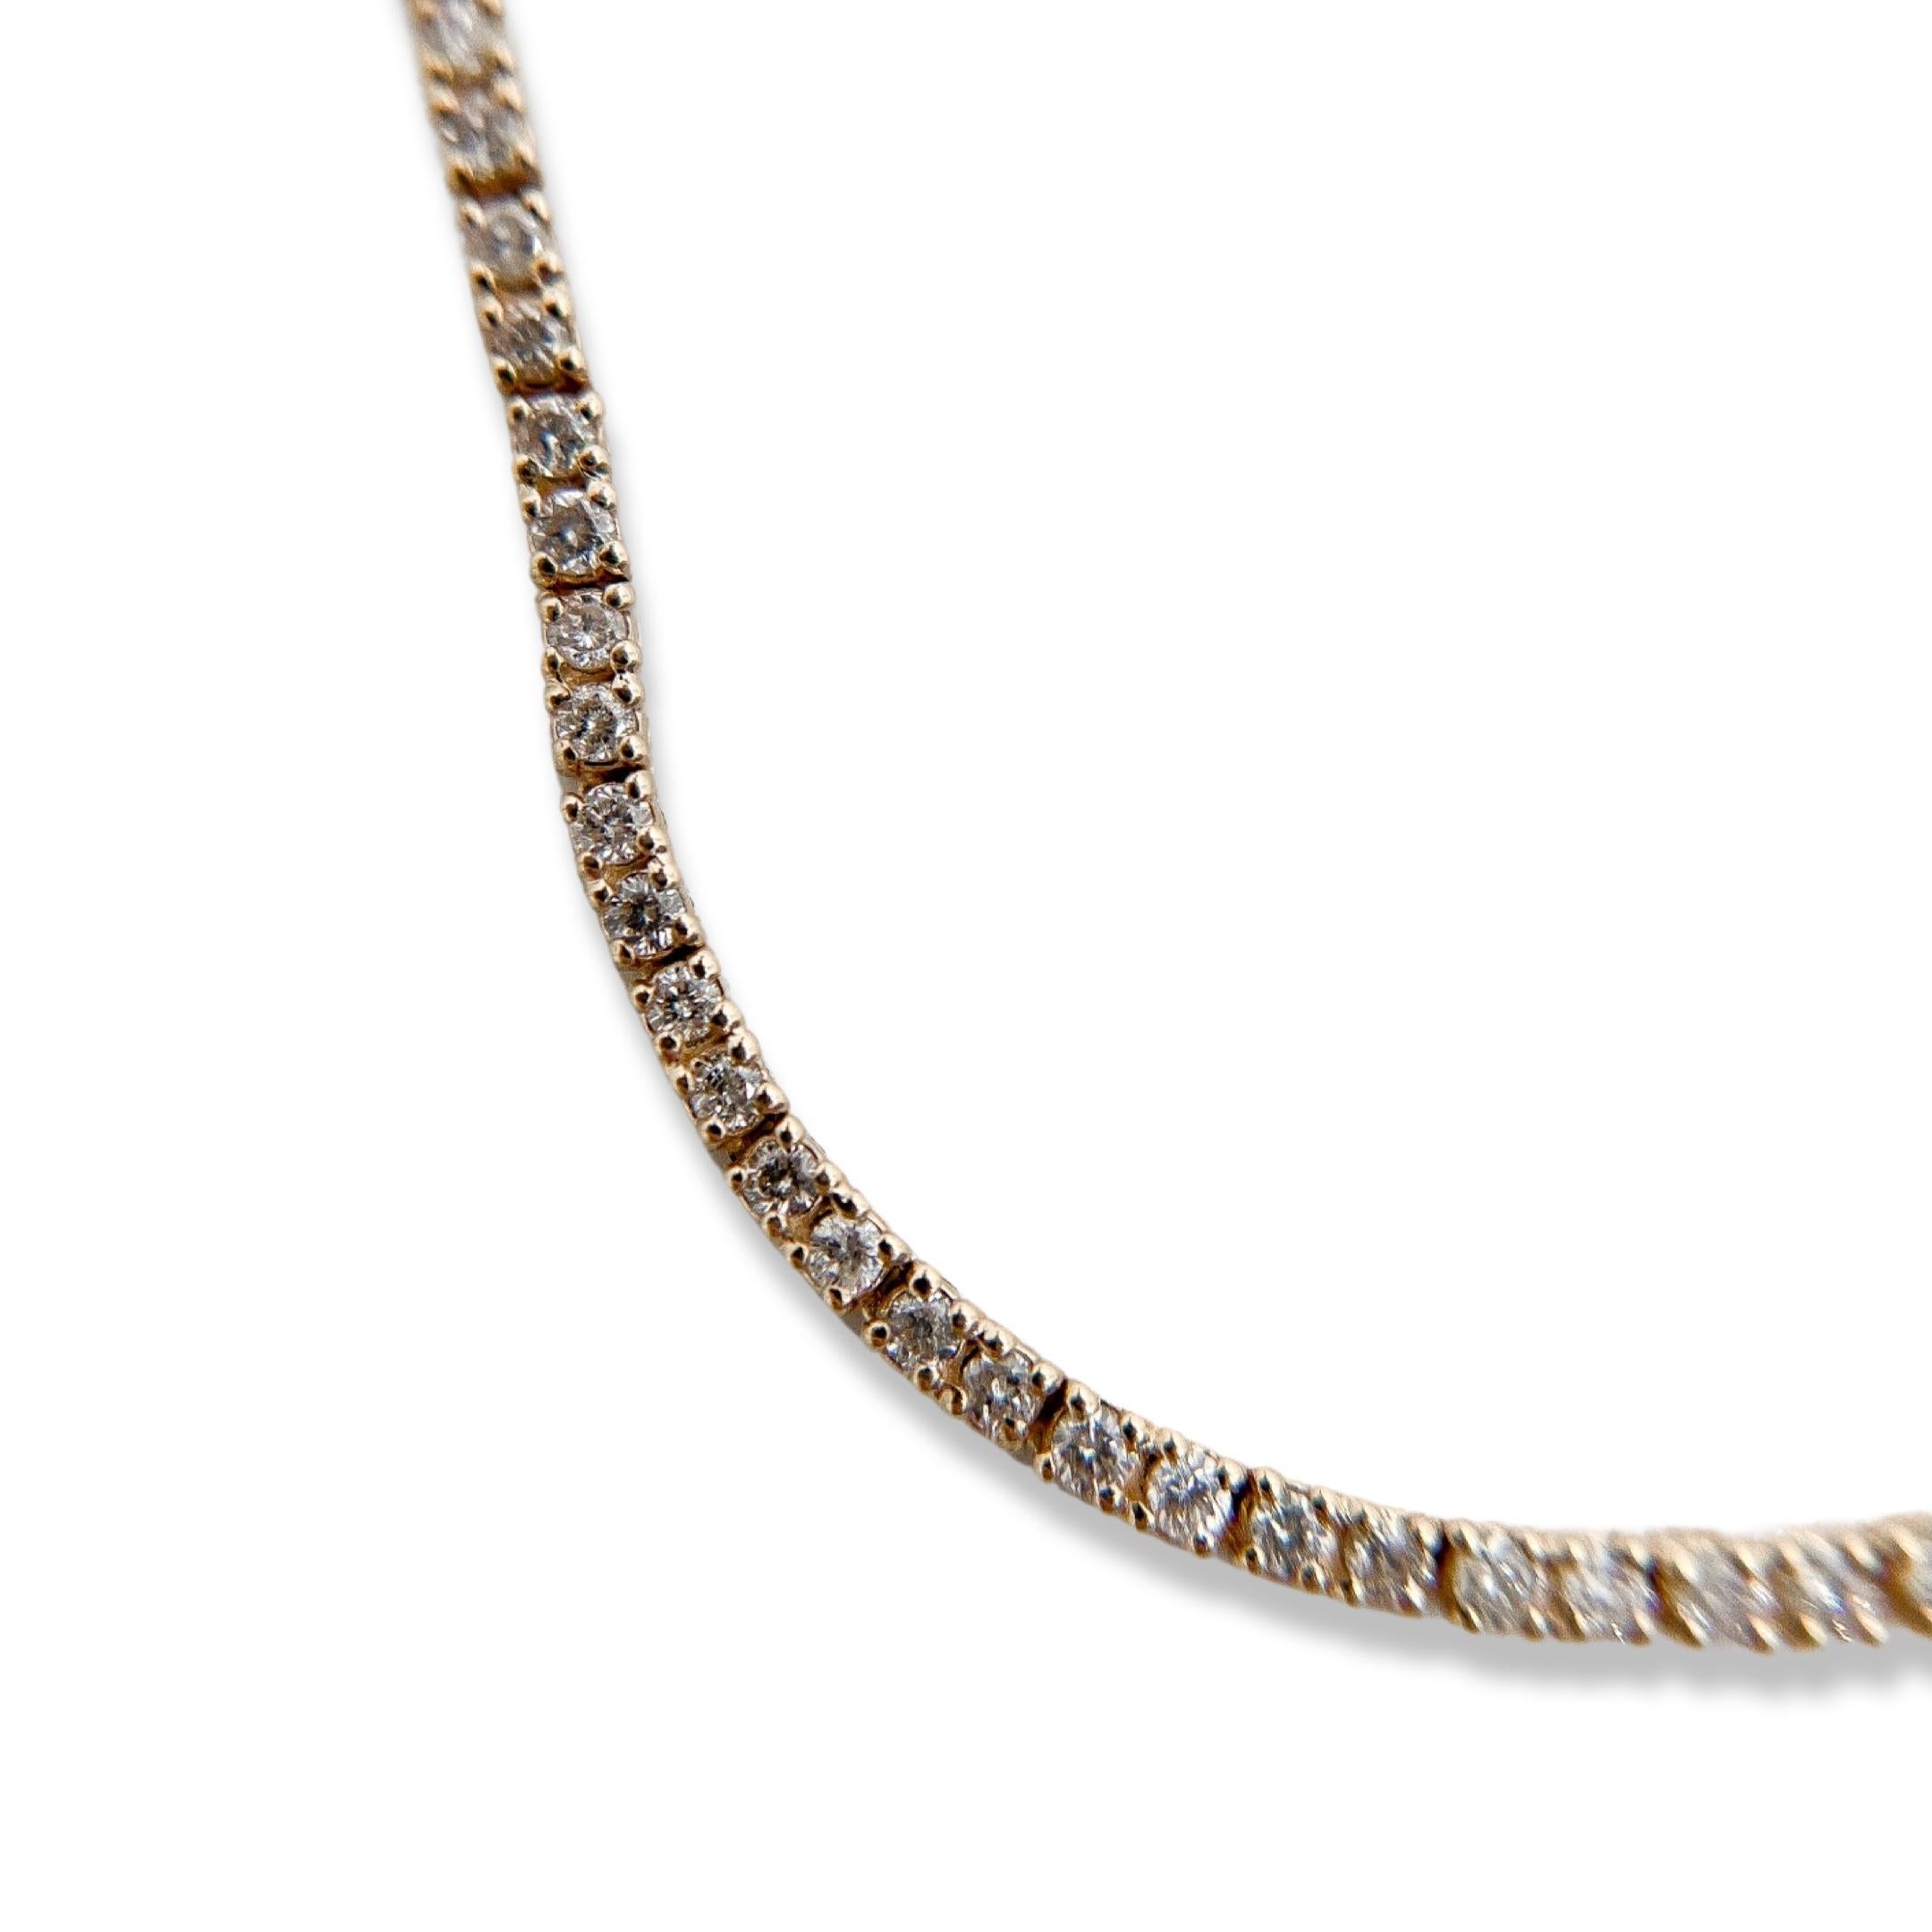 Contemporary 14k 4.4ct Diamond Necklace In Excellent Condition For Sale In Montgomery, AL